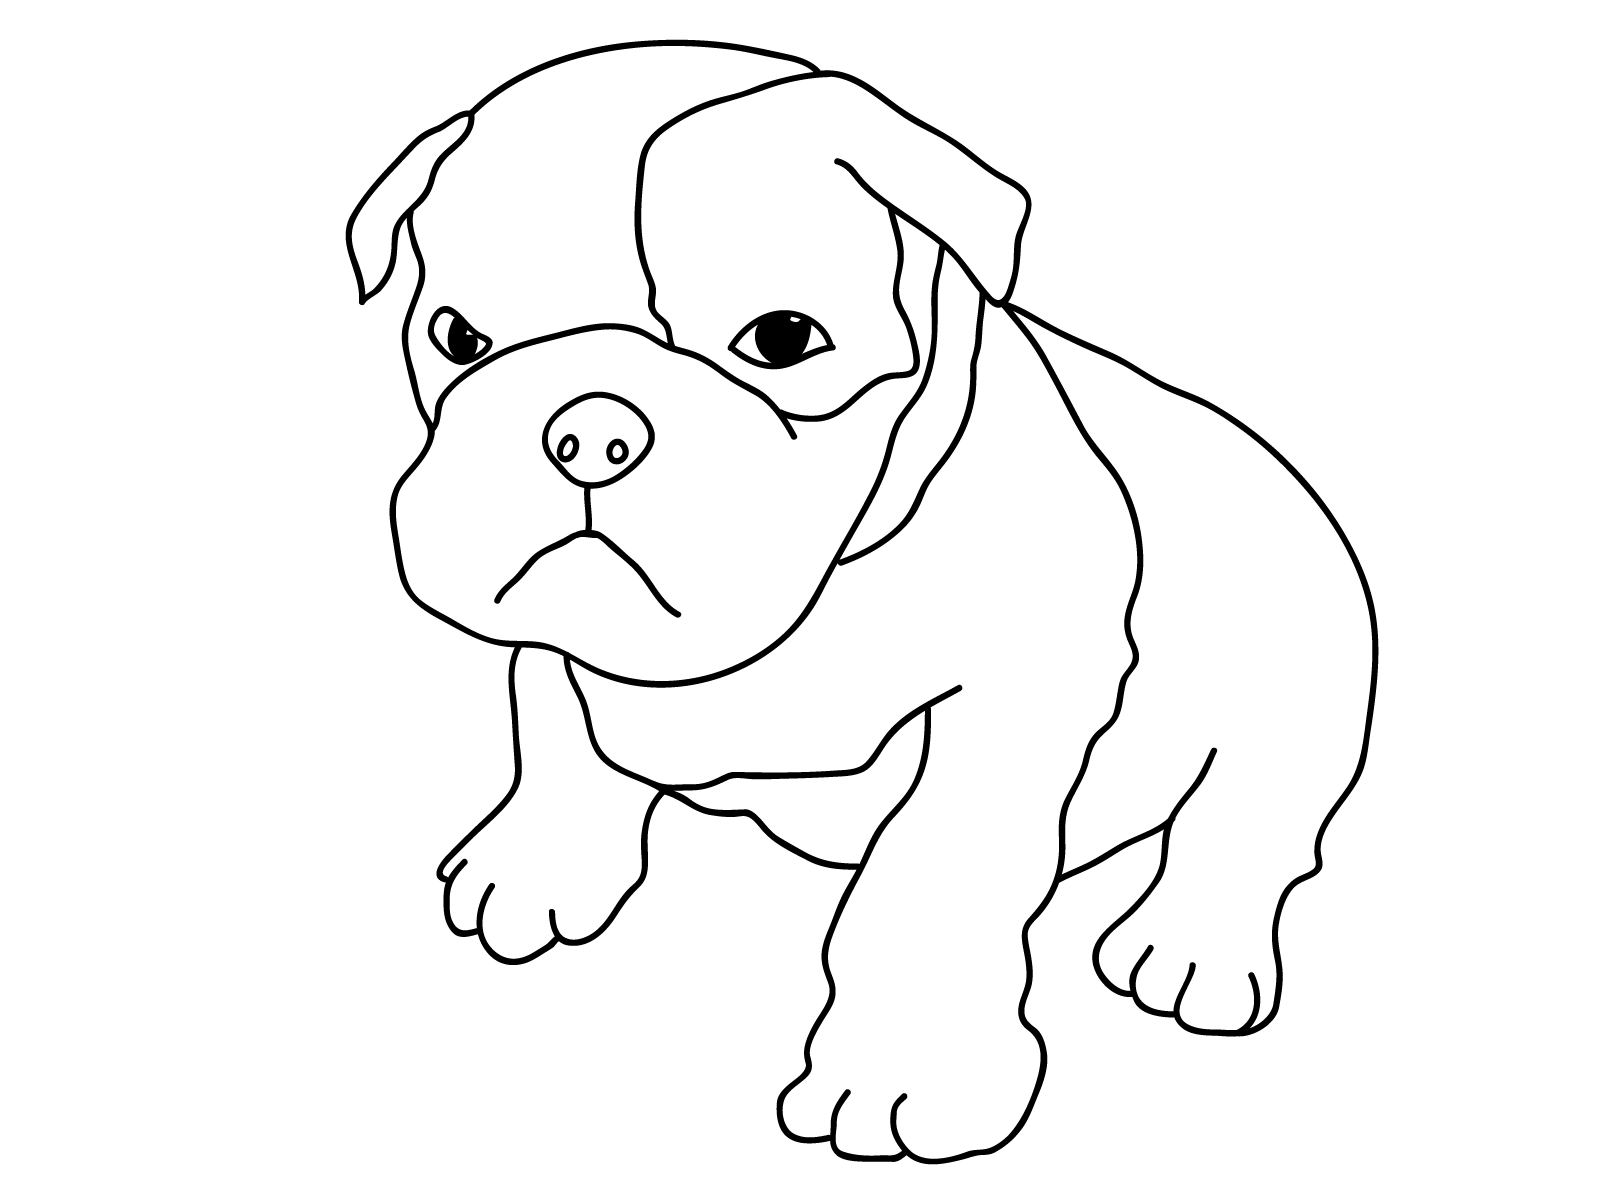 Puppy Dog Coloring Pages (18 Pictures) - Colorine.net | 2085